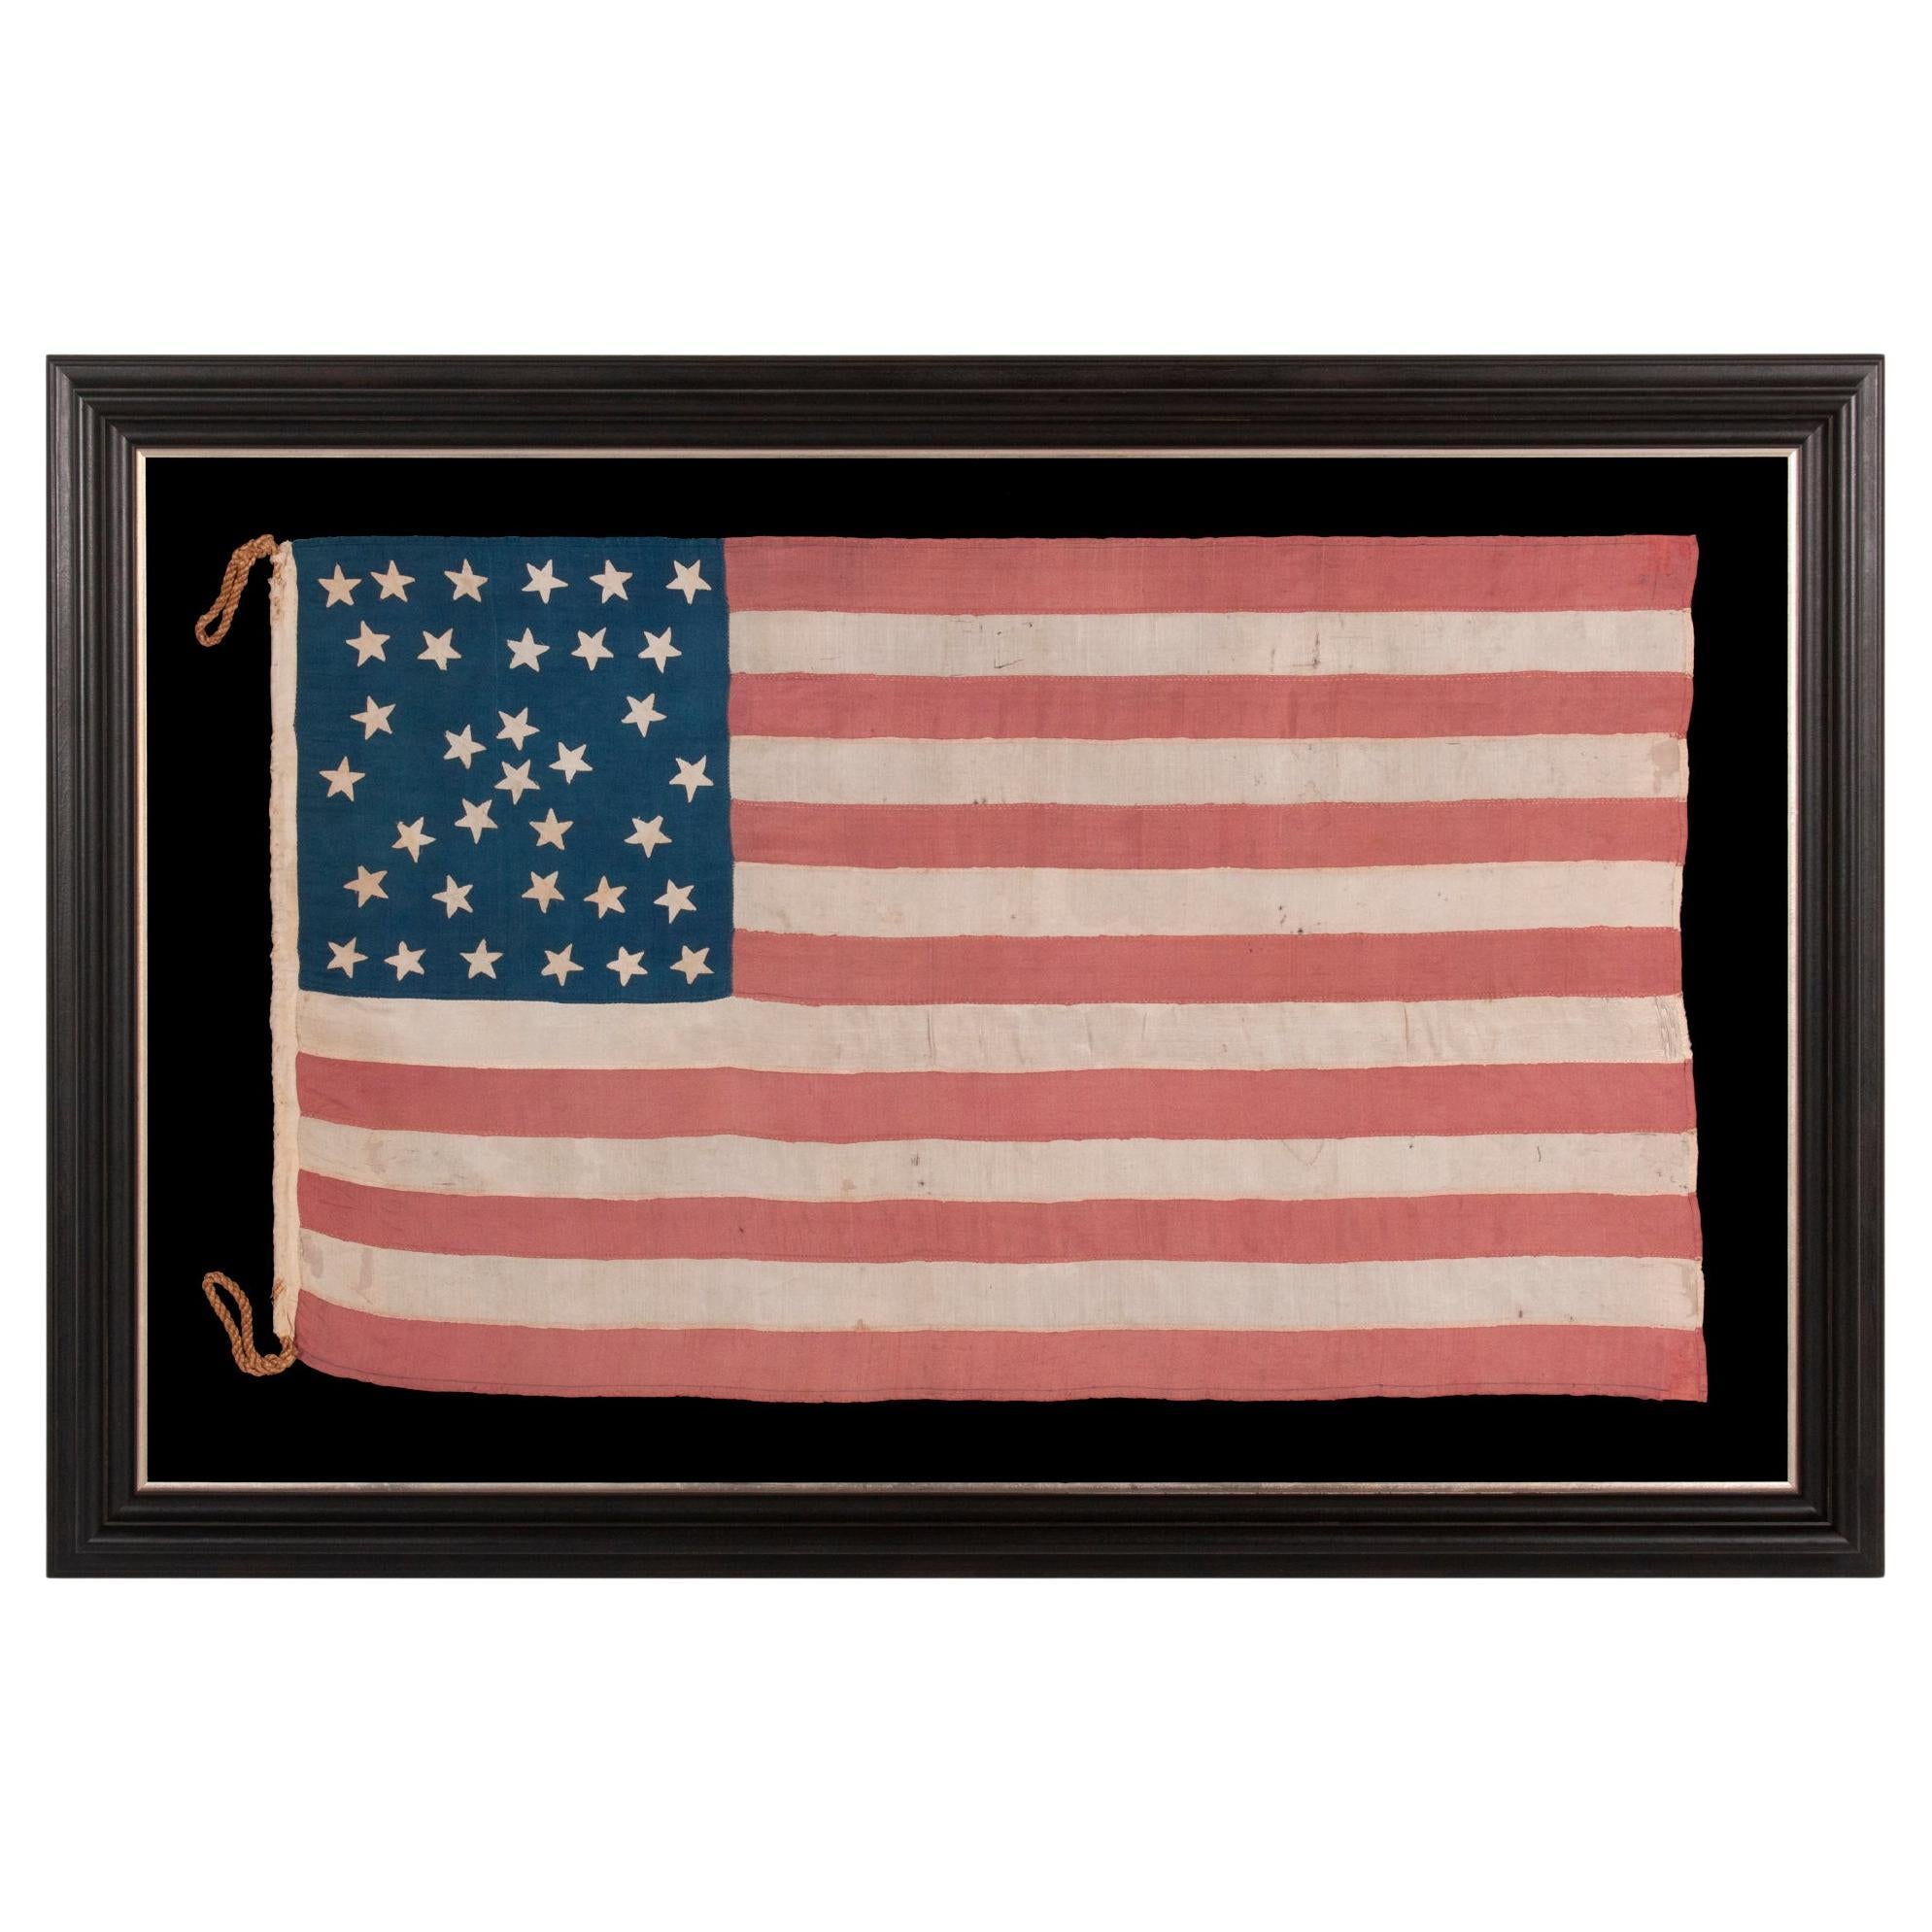 34 Star Antique American Flag with Hourglass Medallion Stars, ca 1861-1863